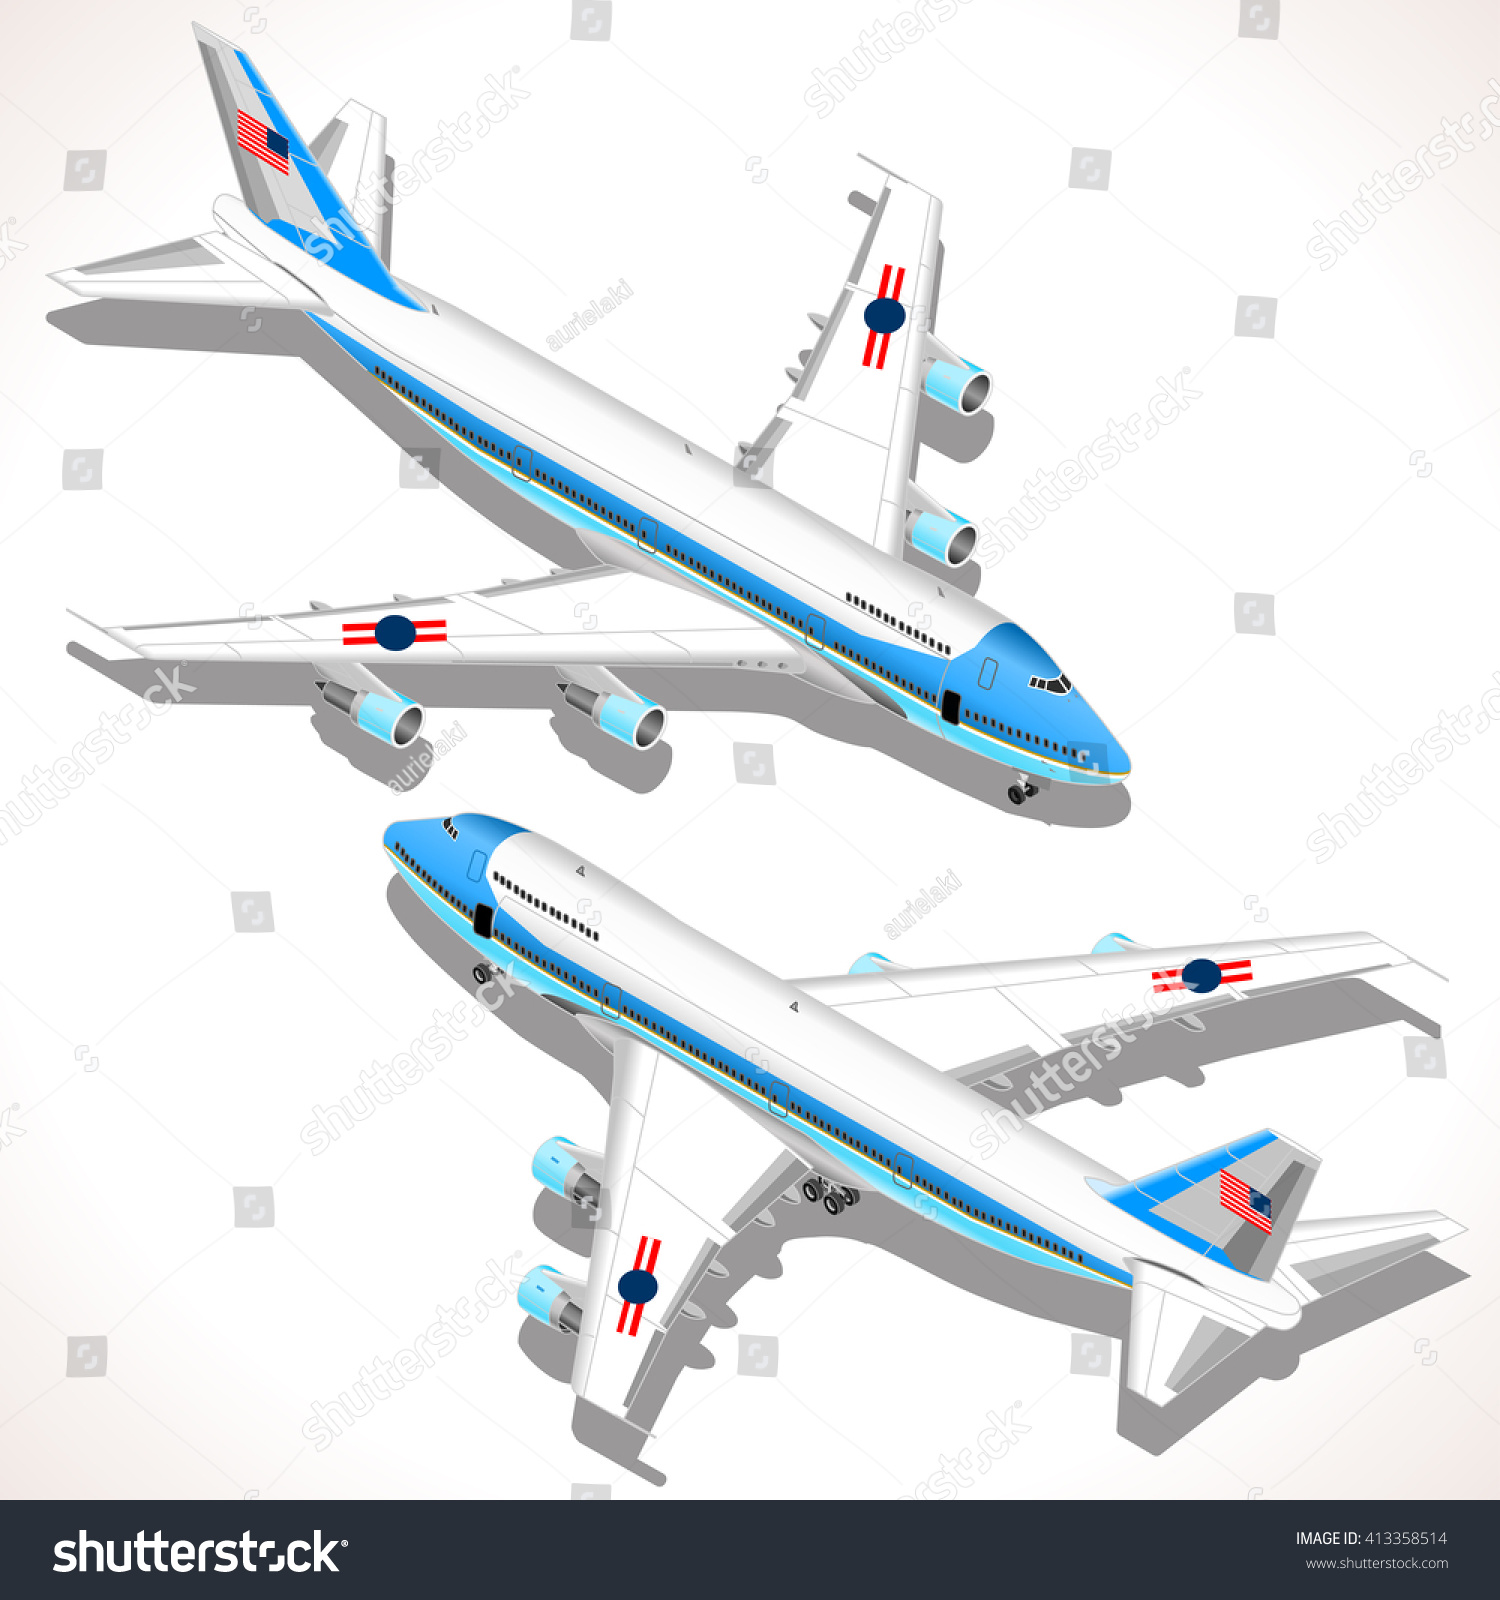 SVG of Boeing aircraft. Flat 3D isometric airplane vehicles. Plane Infographic elements. Landed Airplane in Airport. Armed Forces Military Airplane Isolated. Presidential Air Force One Vector Illustration. svg